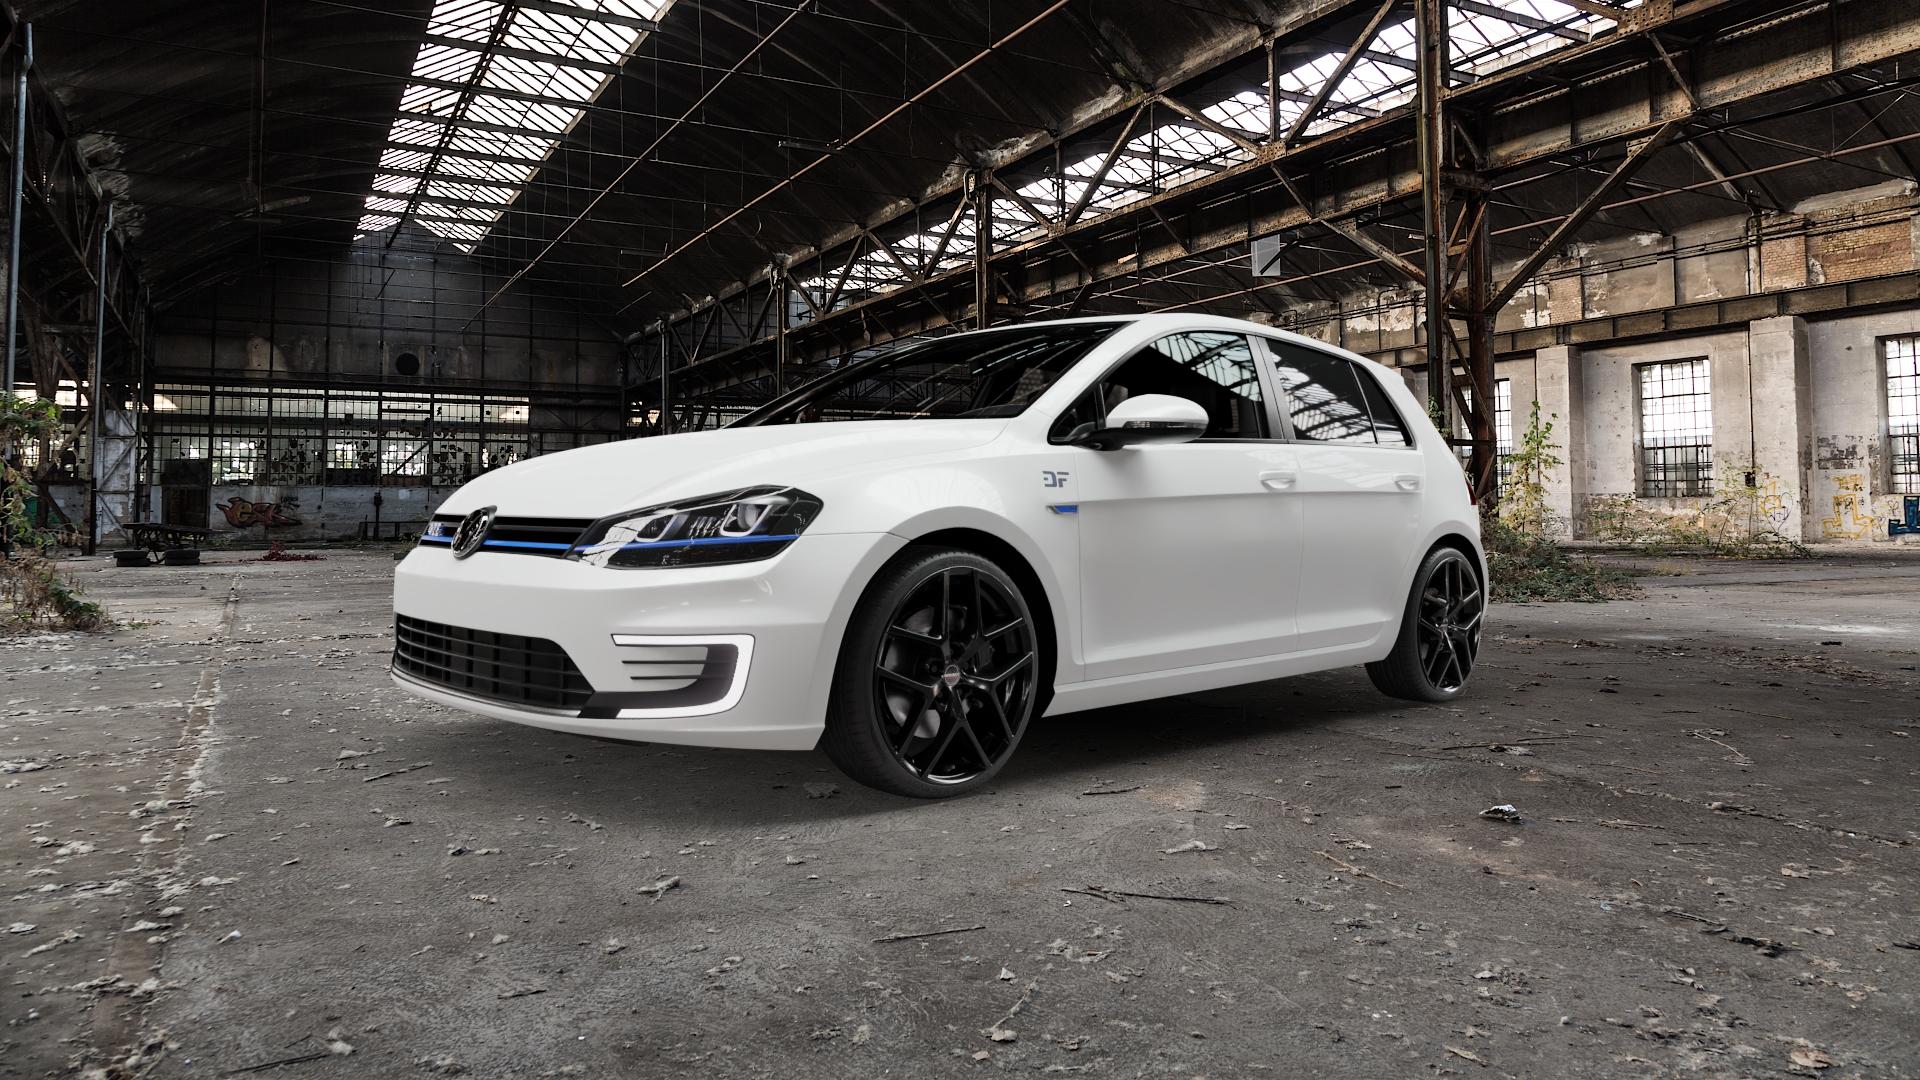 Volkswagen (VW) Golf 7 Facelift 1,4l GTE 110kW Hybrid (150 hp) Wheels and  Tyre Packages